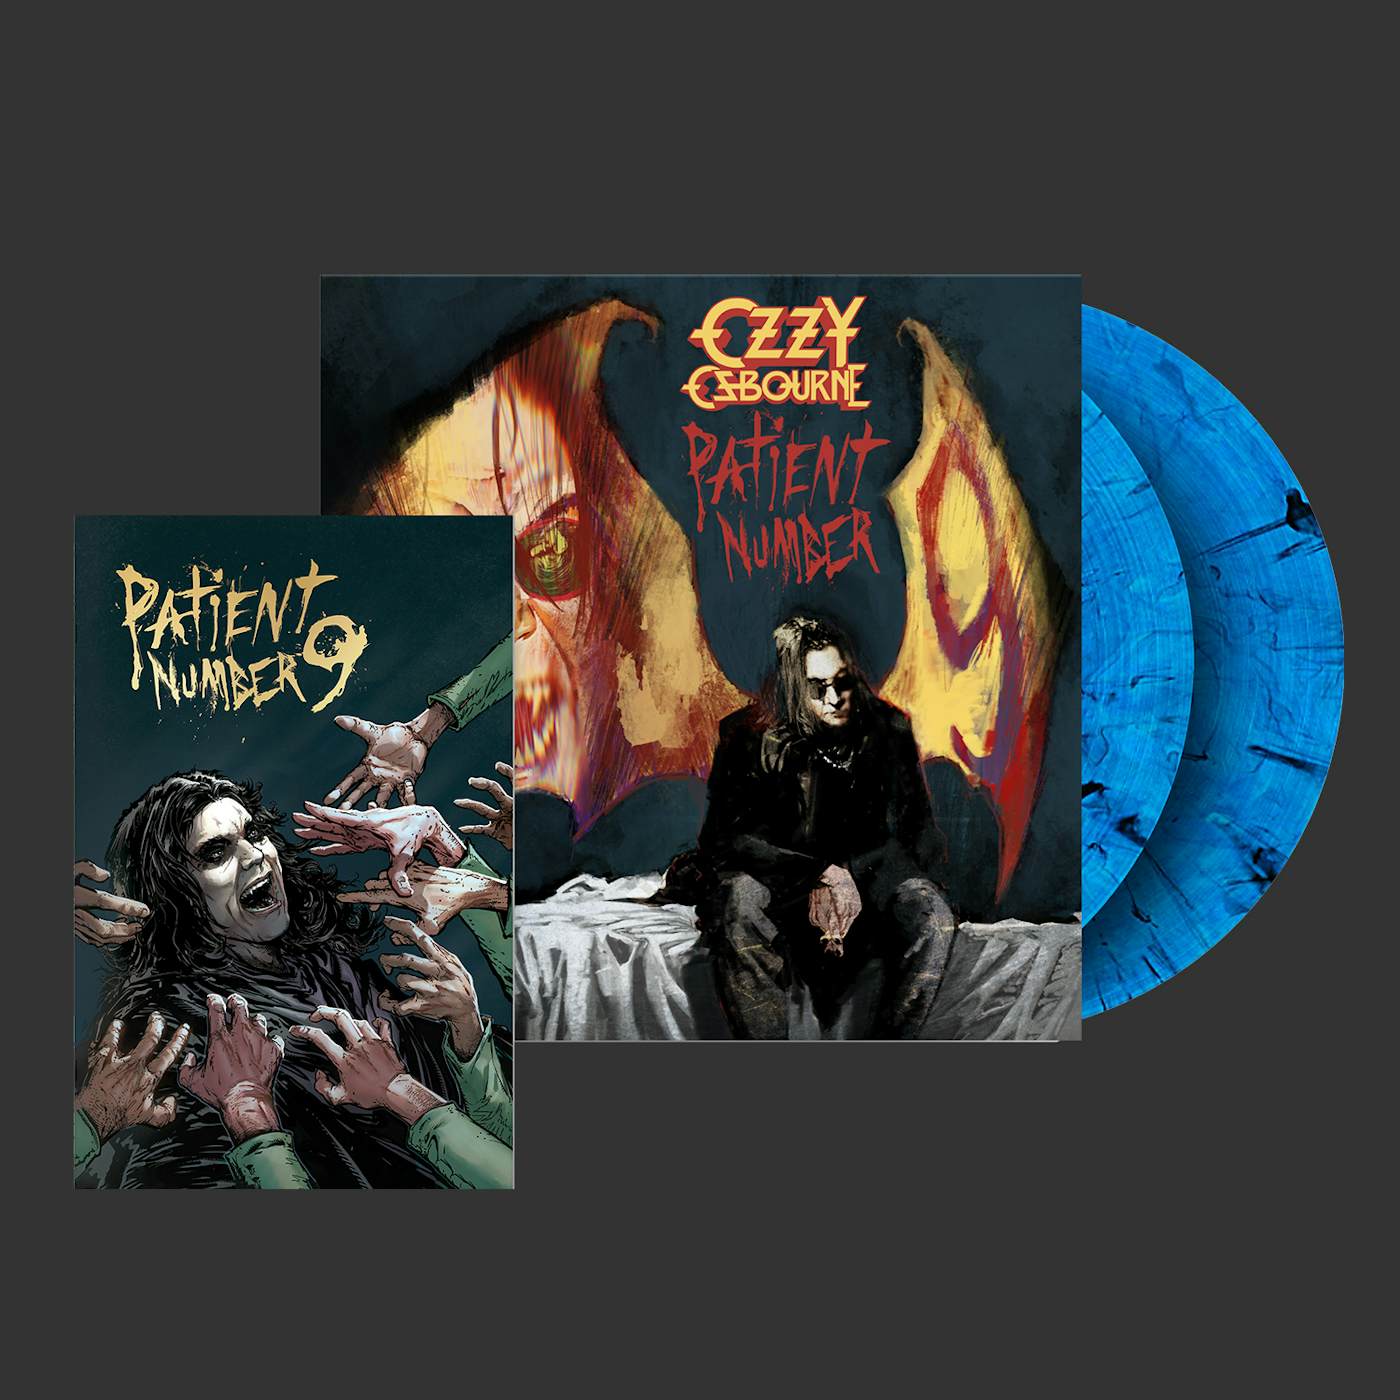 Ozzy Osbourne Convention Exclusive 2-LP Blue Smoke Vinyl w/Todd McFarlane Cover Variant + Gold Foil Cover Comic Book